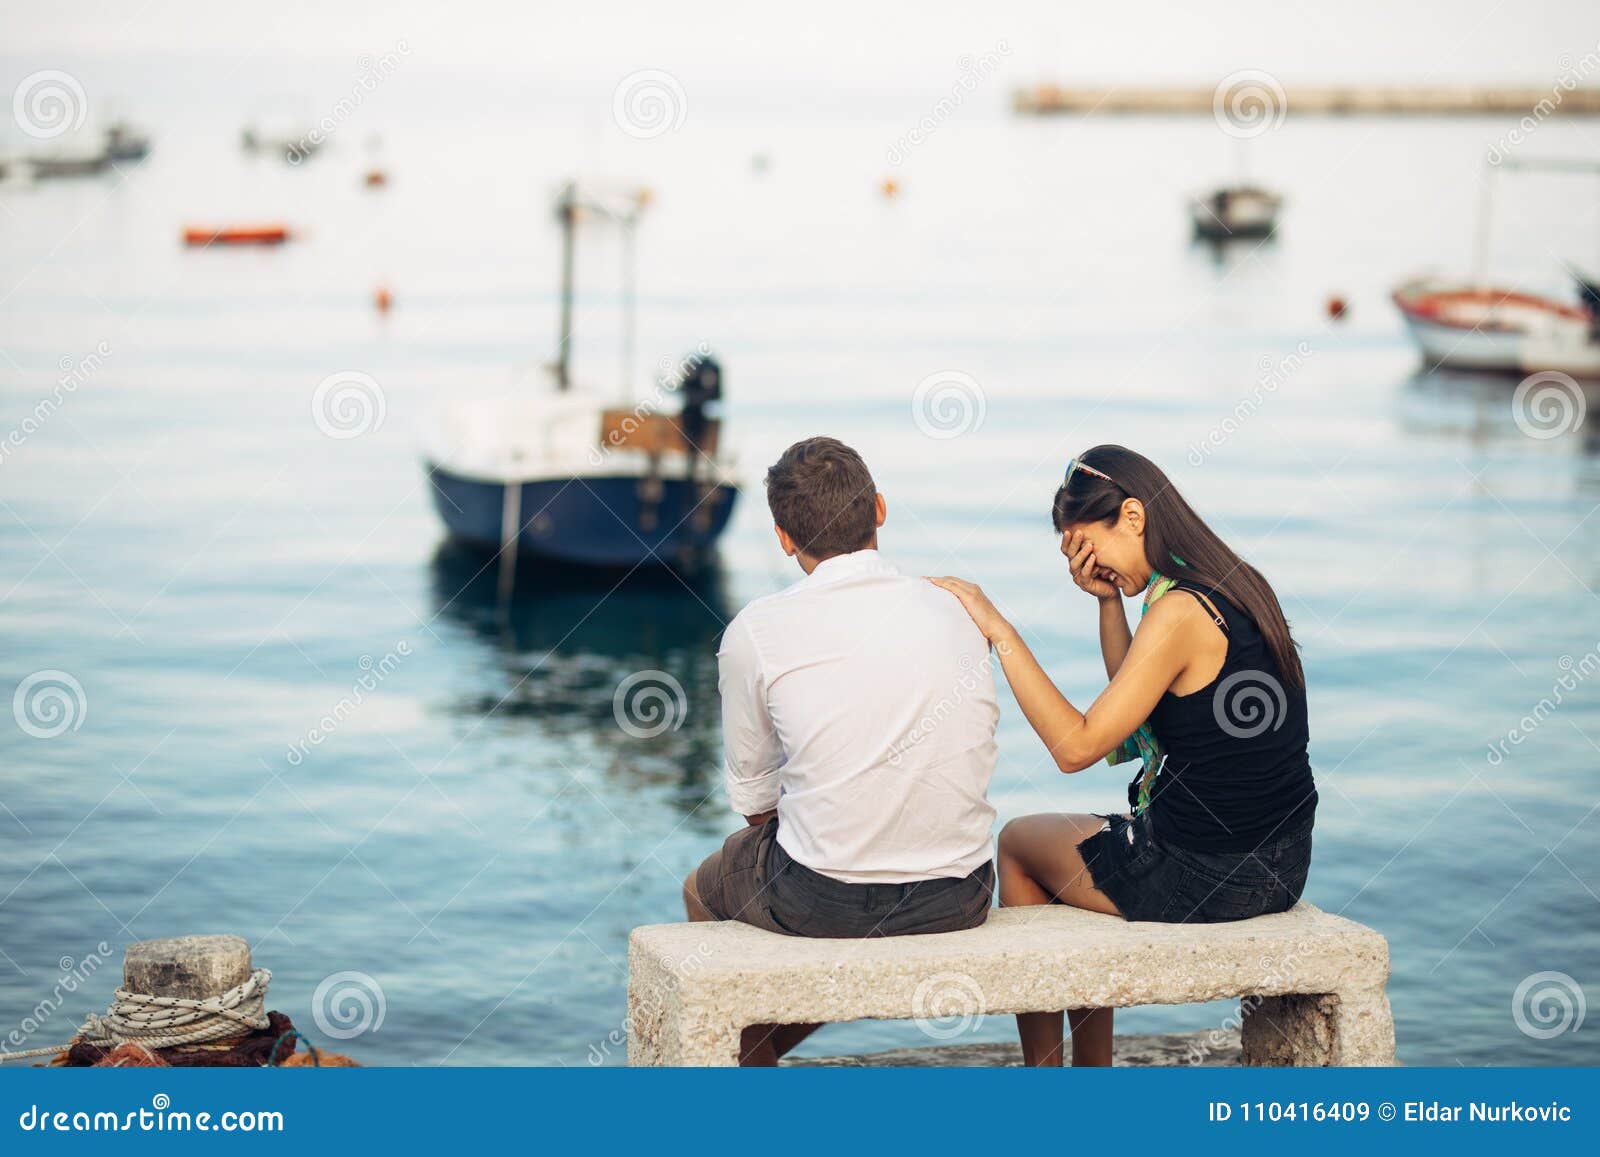 romantic couple having relationship problems.woman crying and begging a man.fisherman life,dangerous occupation.navy sailors